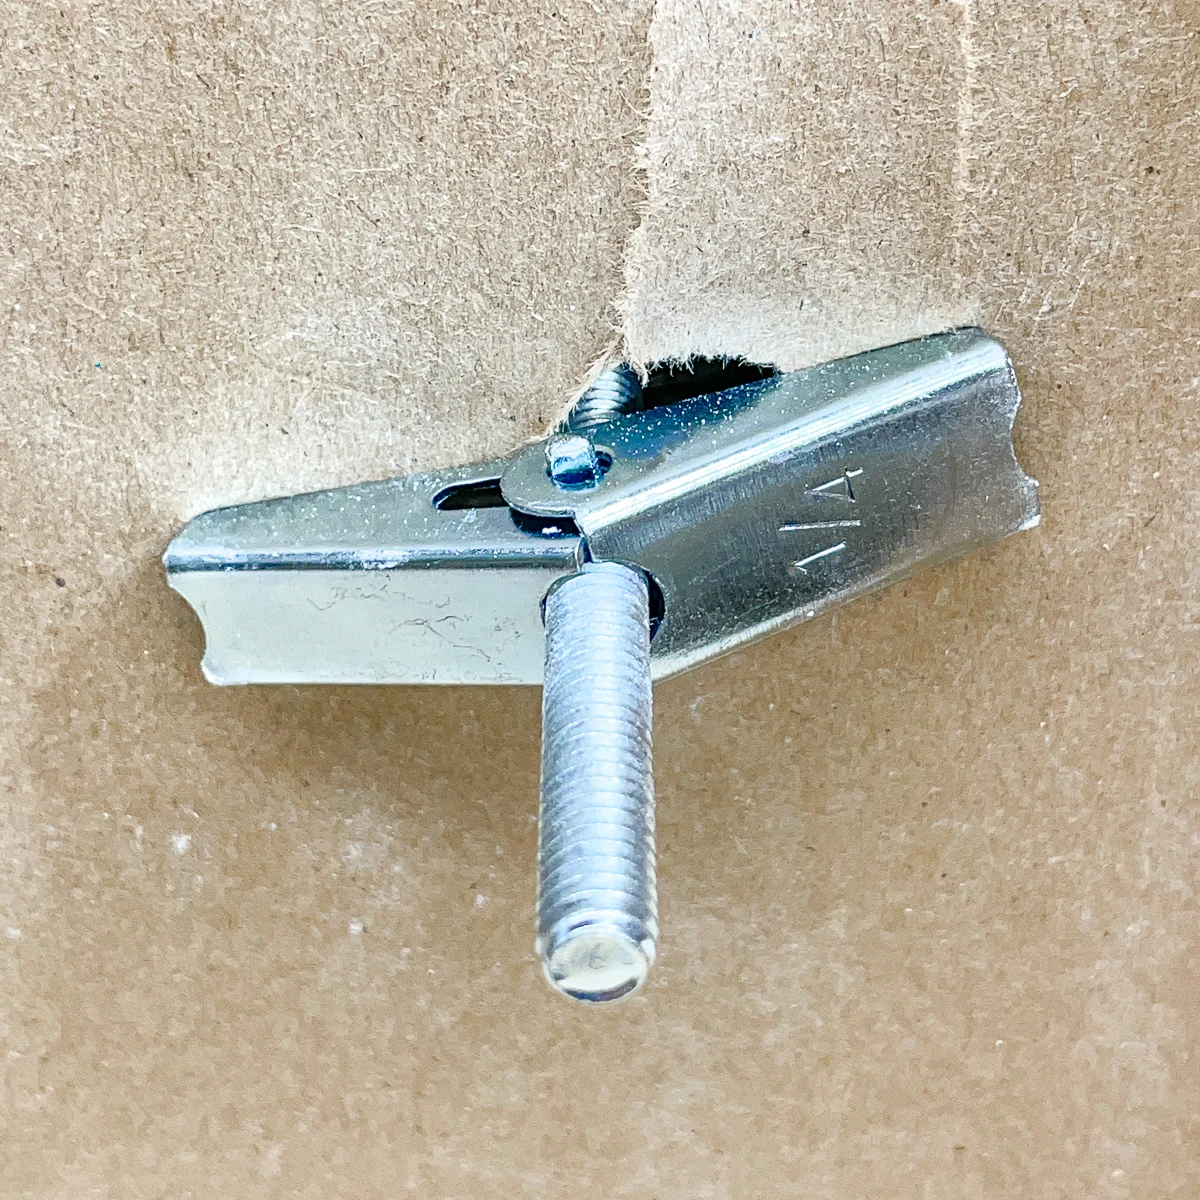 inside the wall, the butterfly nut part of the toggle bolt is tight against the wall when properly installed